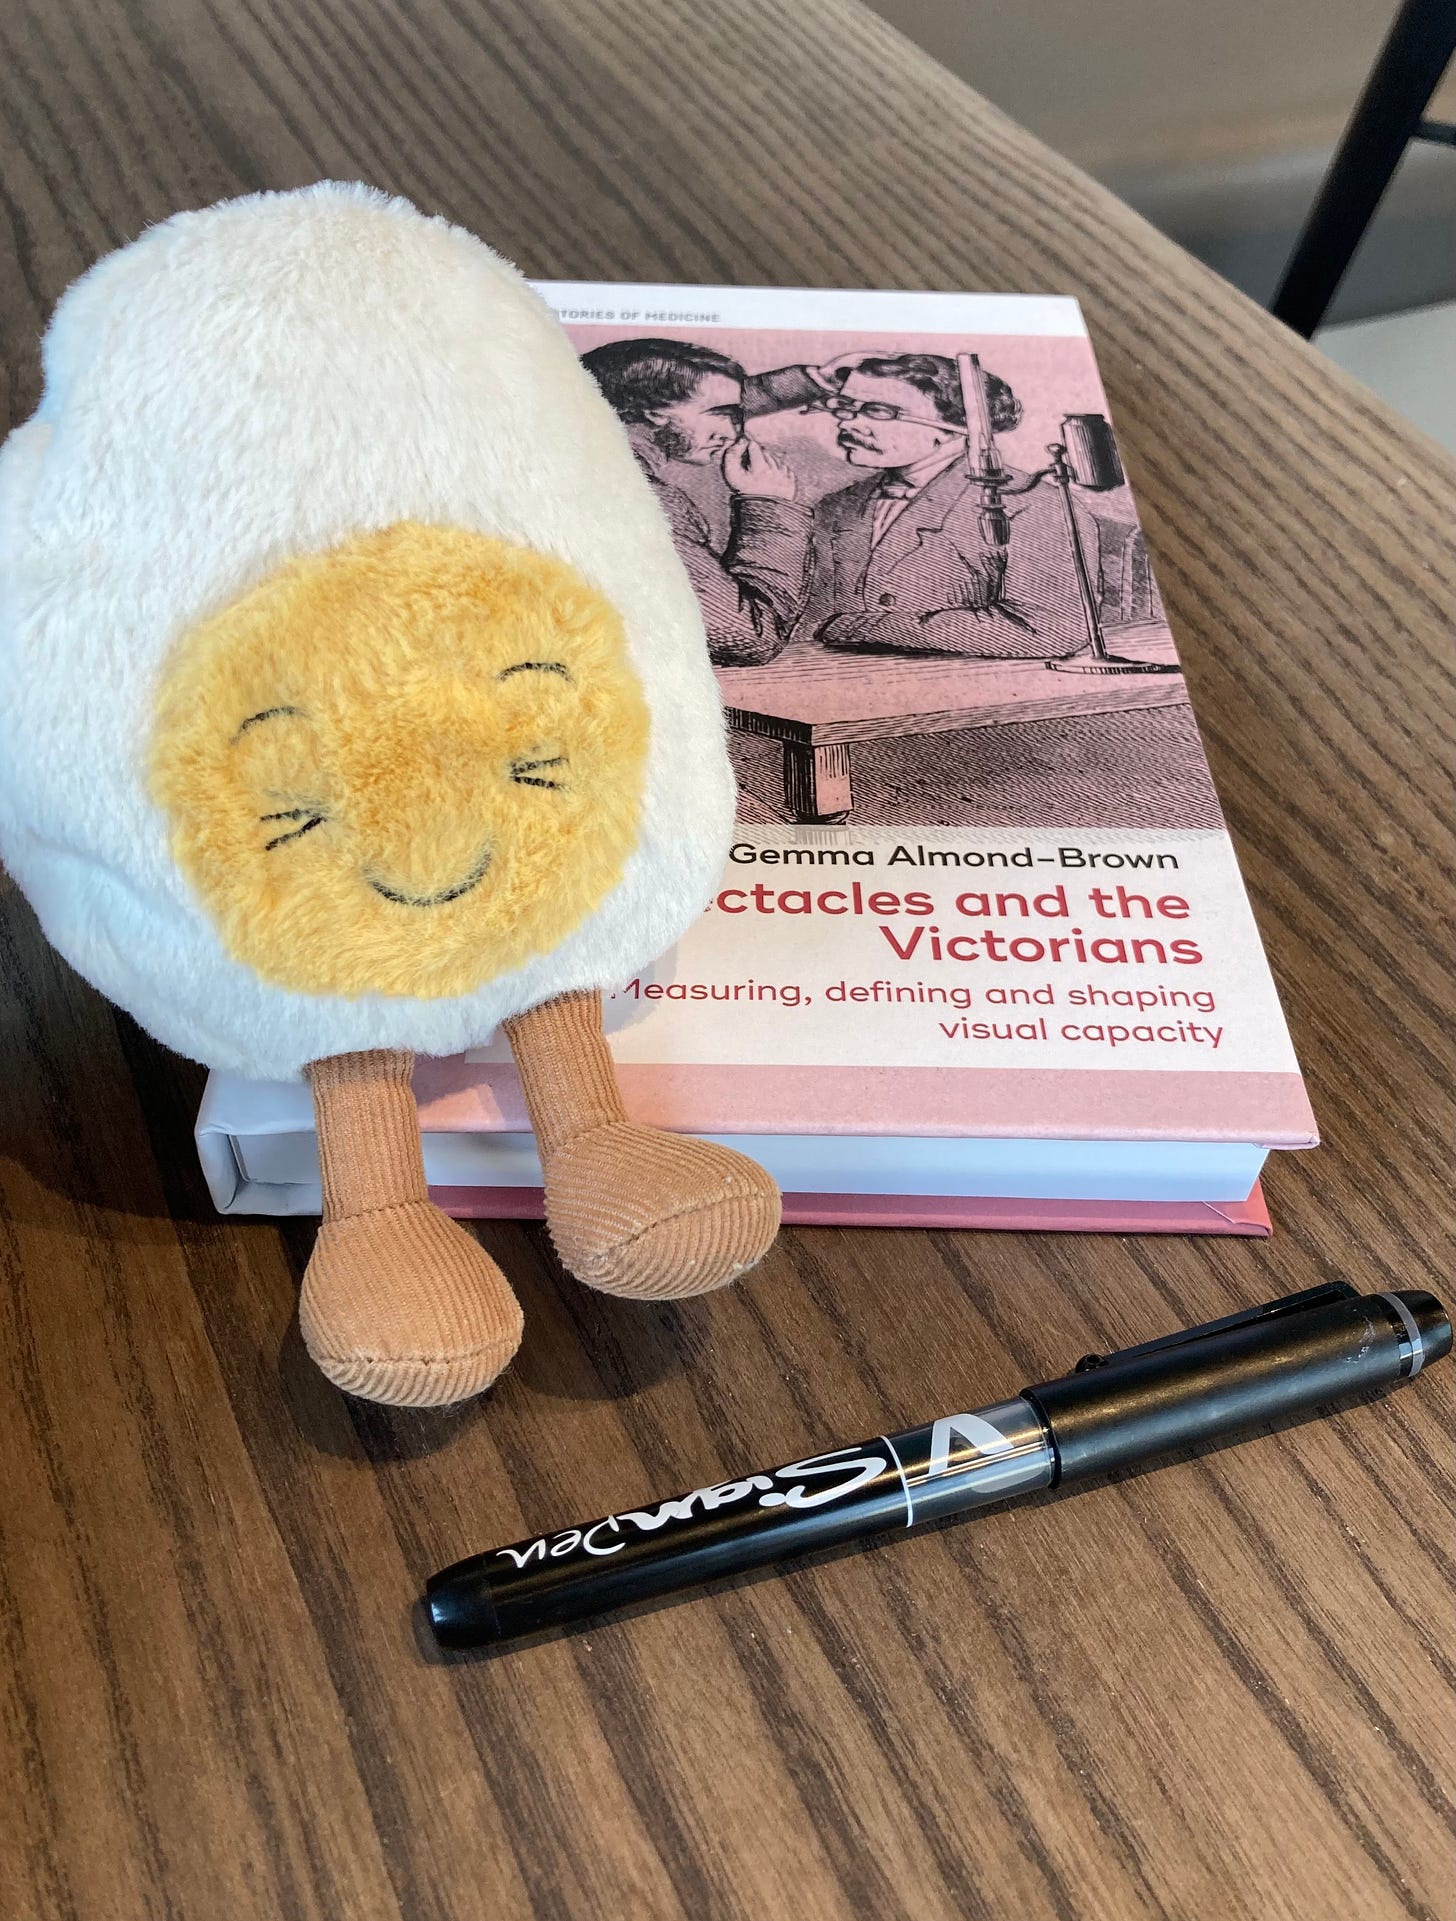 Photograph of Dippy the soft toy egg sitting on top of a hardback book titled Spectacles and the Victorians by Gemma Almond-Brown. They are sitting on a wooden table together, with a inky black pen waiting to be used.